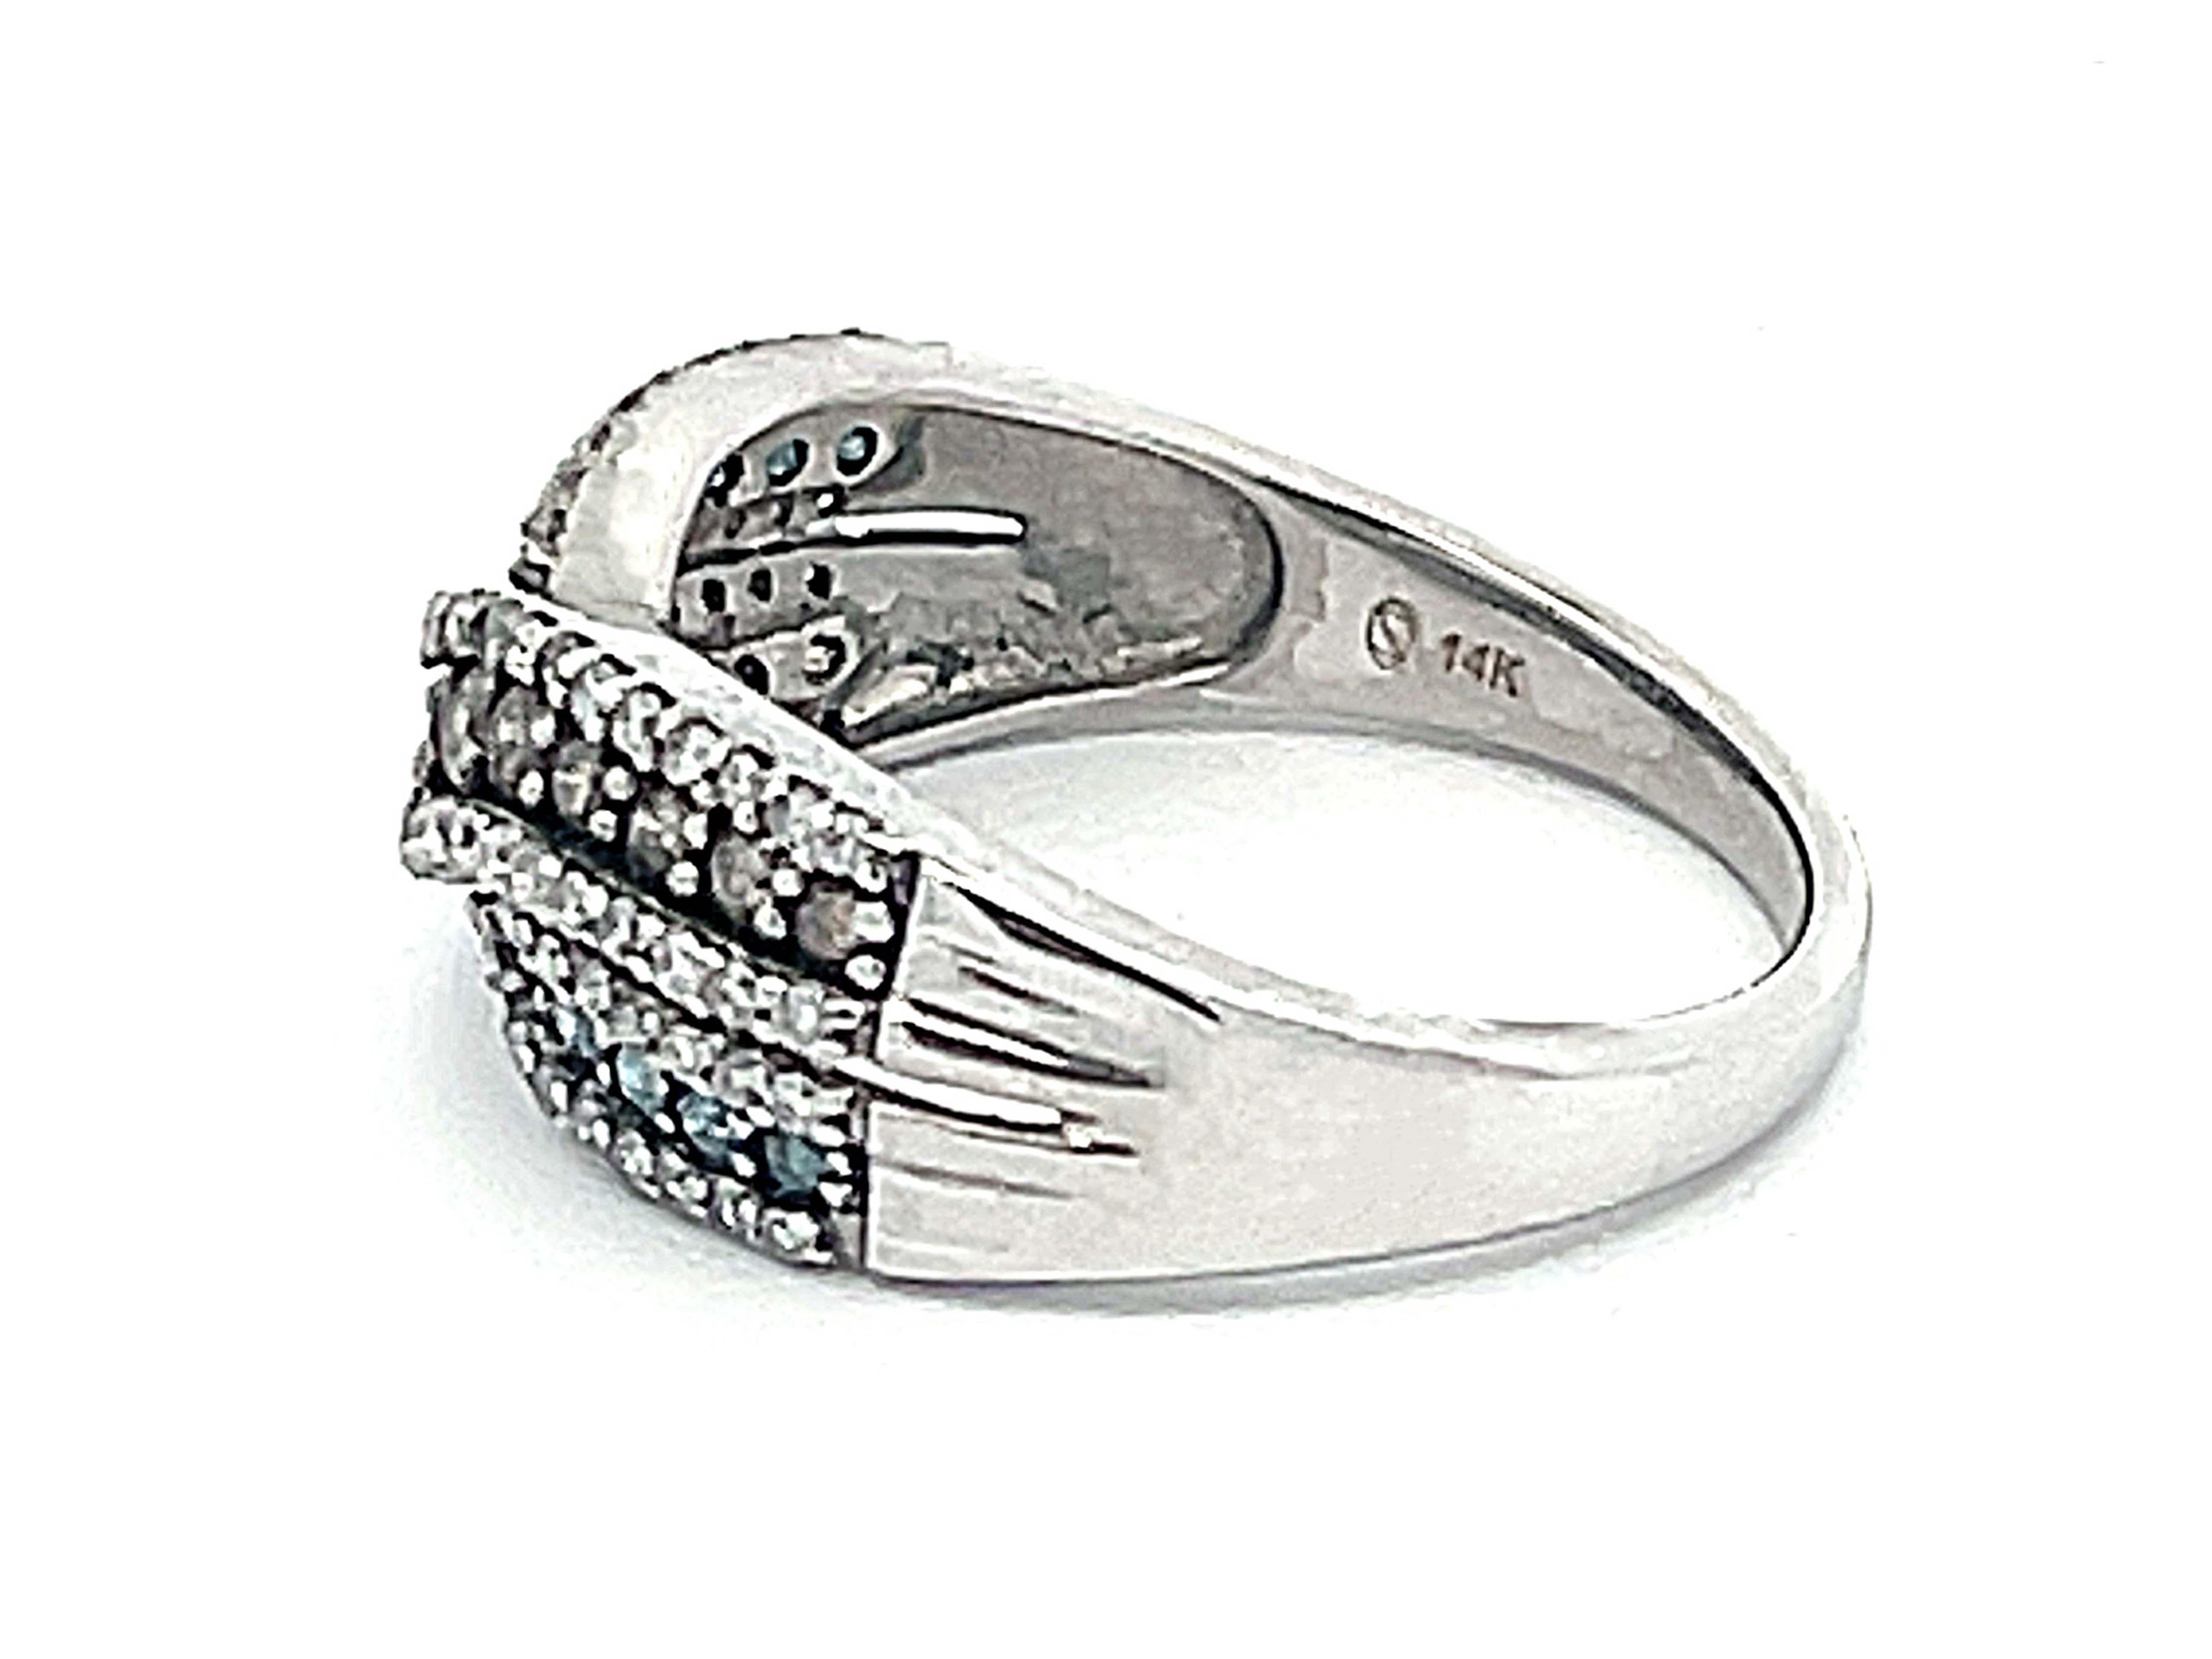 Blue, Chocolate and White Diamond Band Ring in 14k White Gold In Excellent Condition For Sale In Honolulu, HI